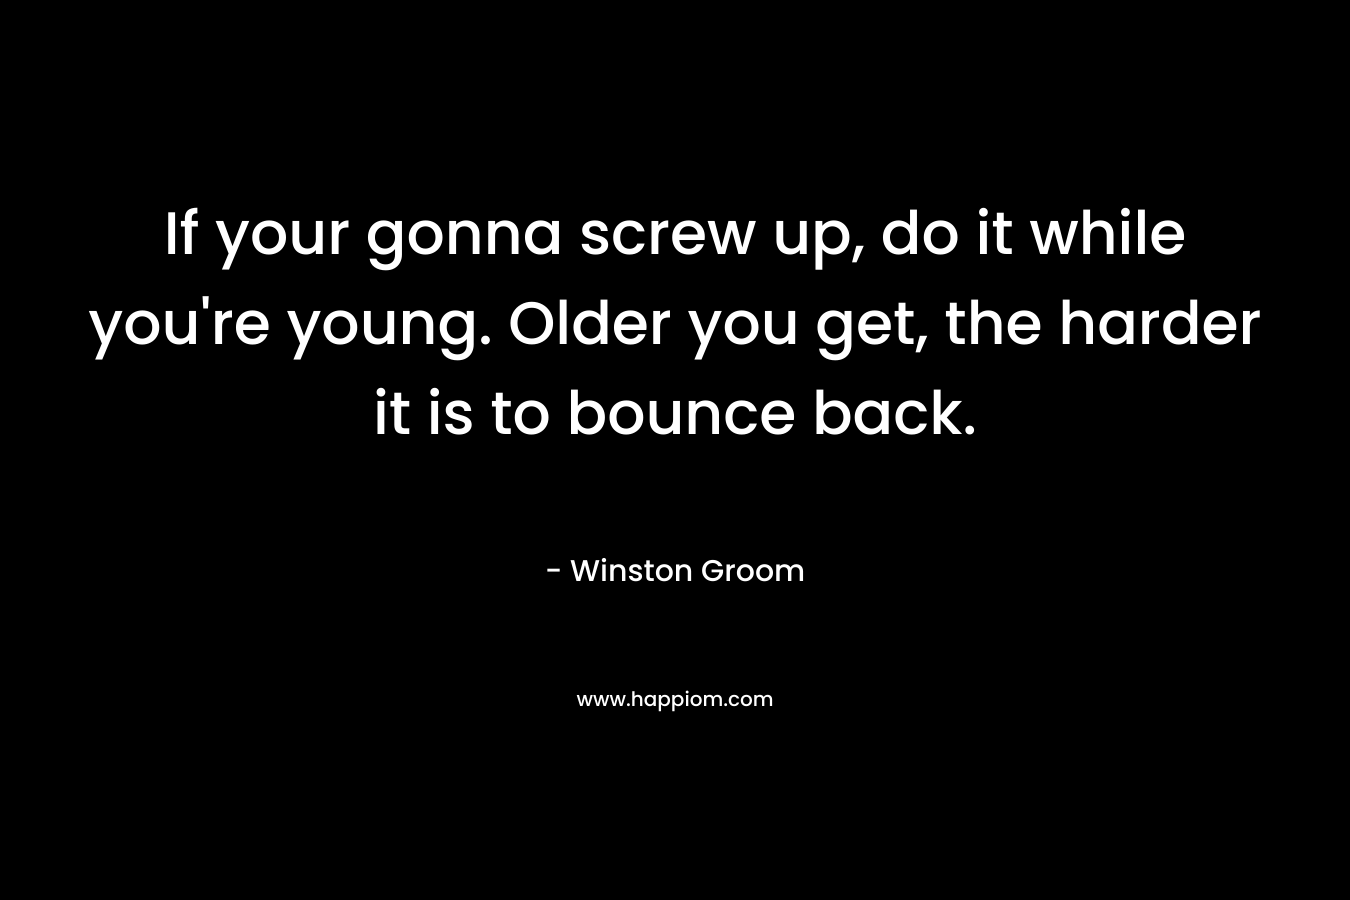 If your gonna screw up, do it while you're young. Older you get, the harder it is to bounce back.